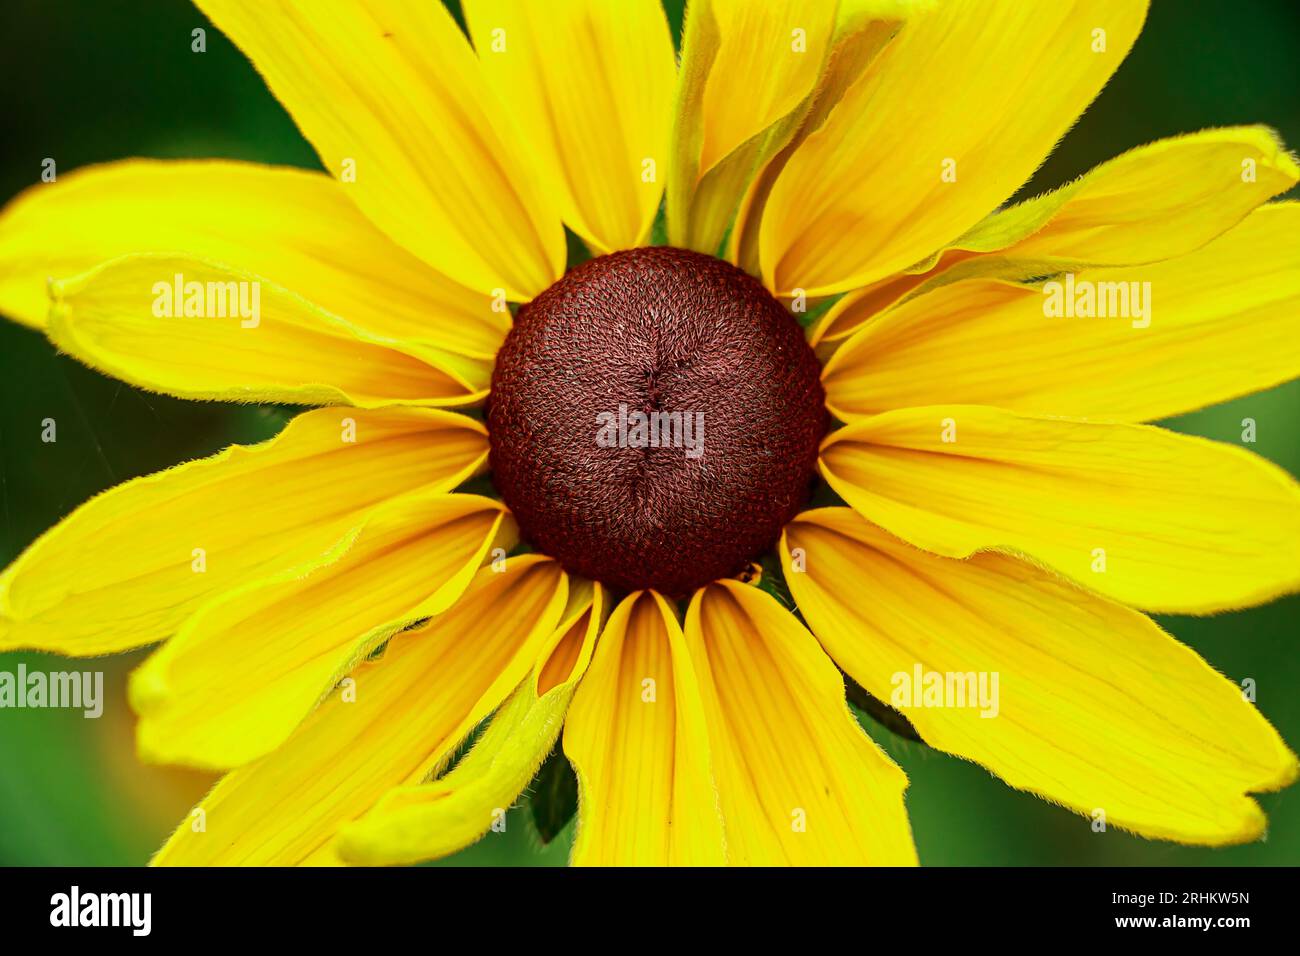 Yellow flower rudbeckia goldsturm close-up. Growing medicinal plants in garden. Summer natural background. Stock Photo